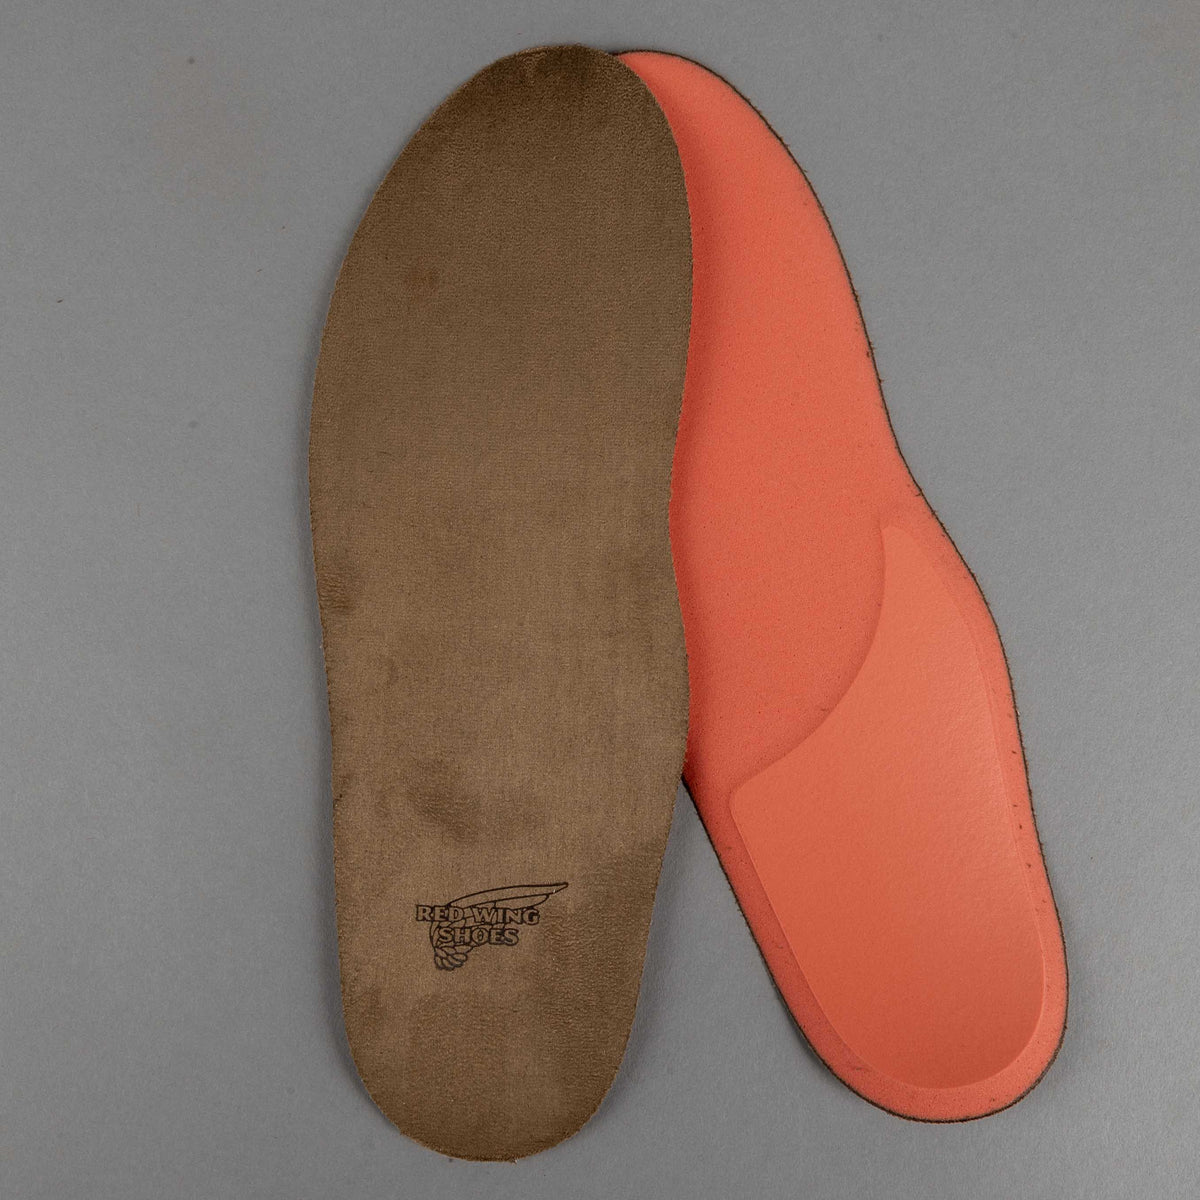 Shaped Comfort insoles